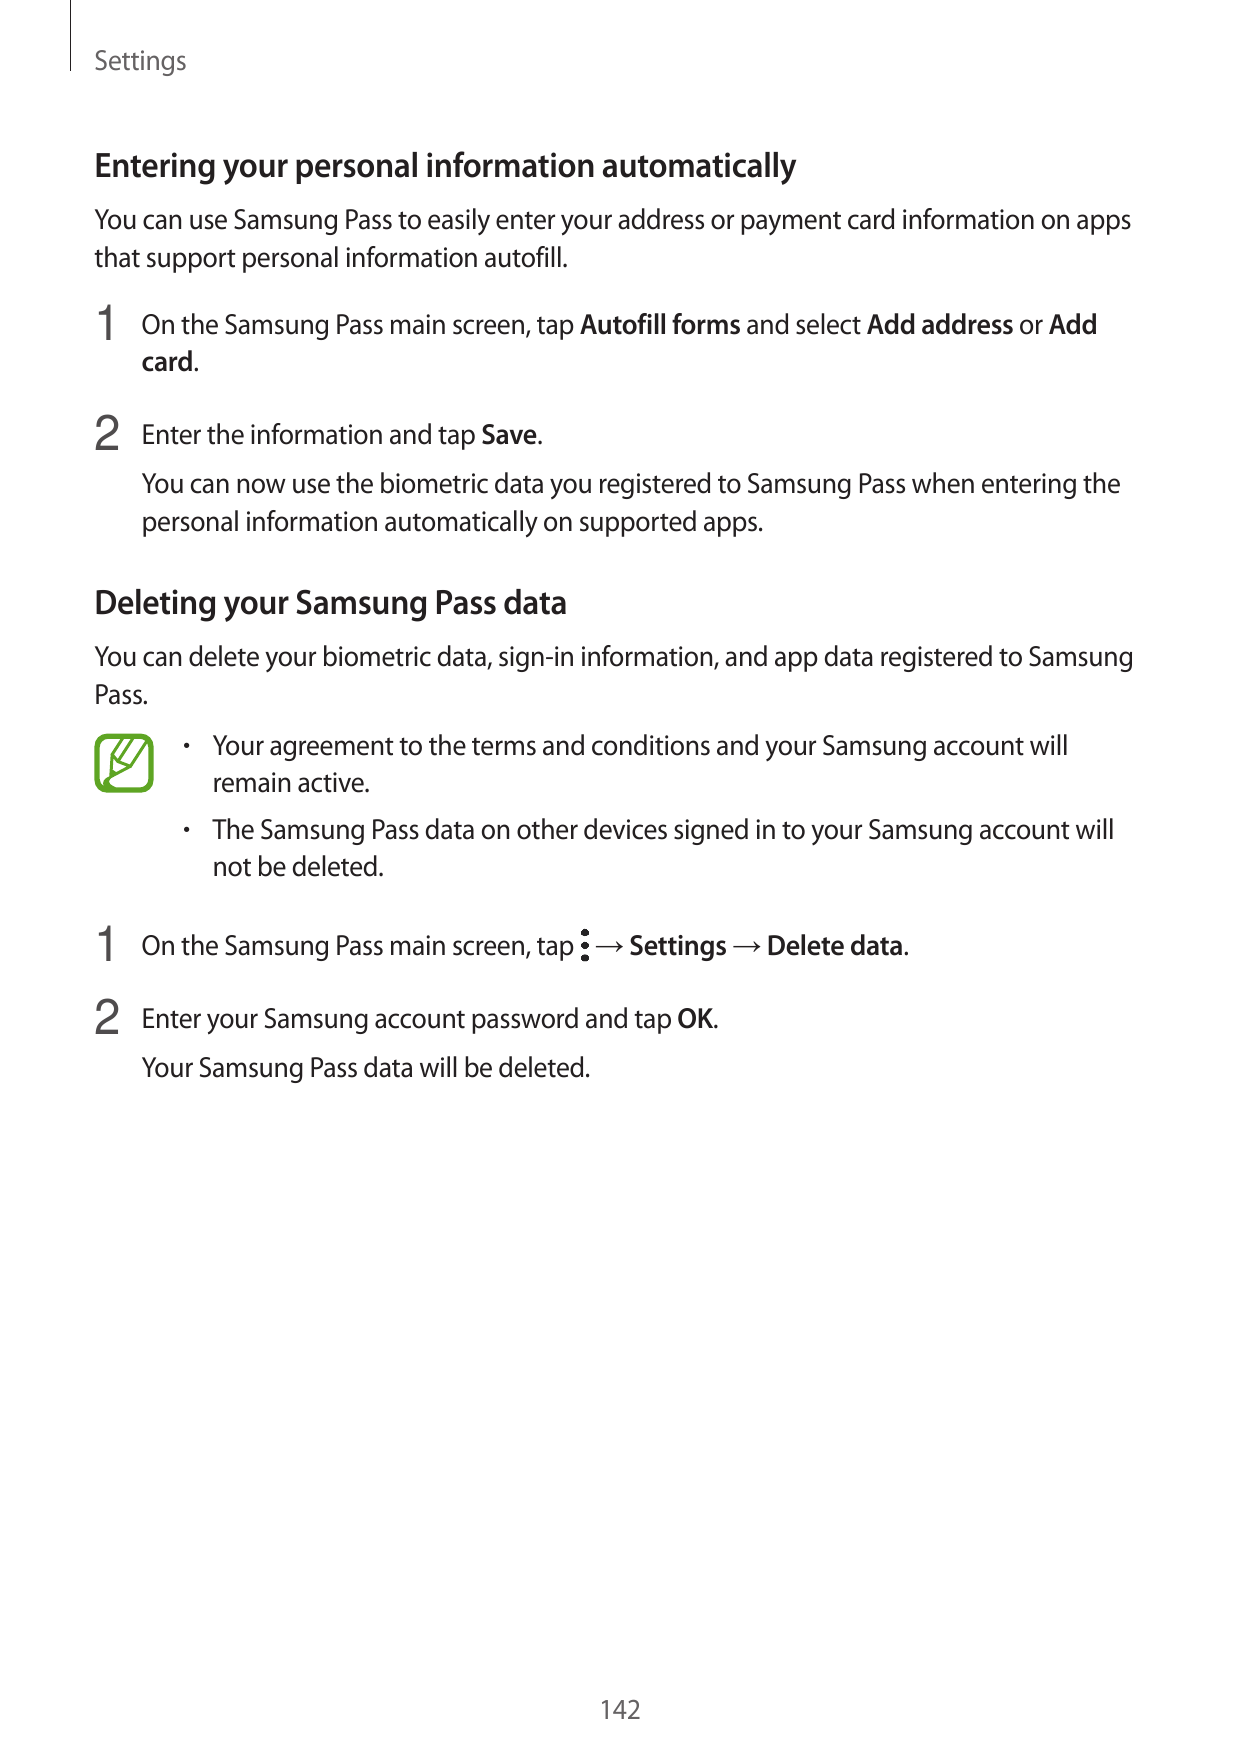 SettingsEntering your personal information automaticallyYou can use Samsung Pass to easily enter your address or payment card in